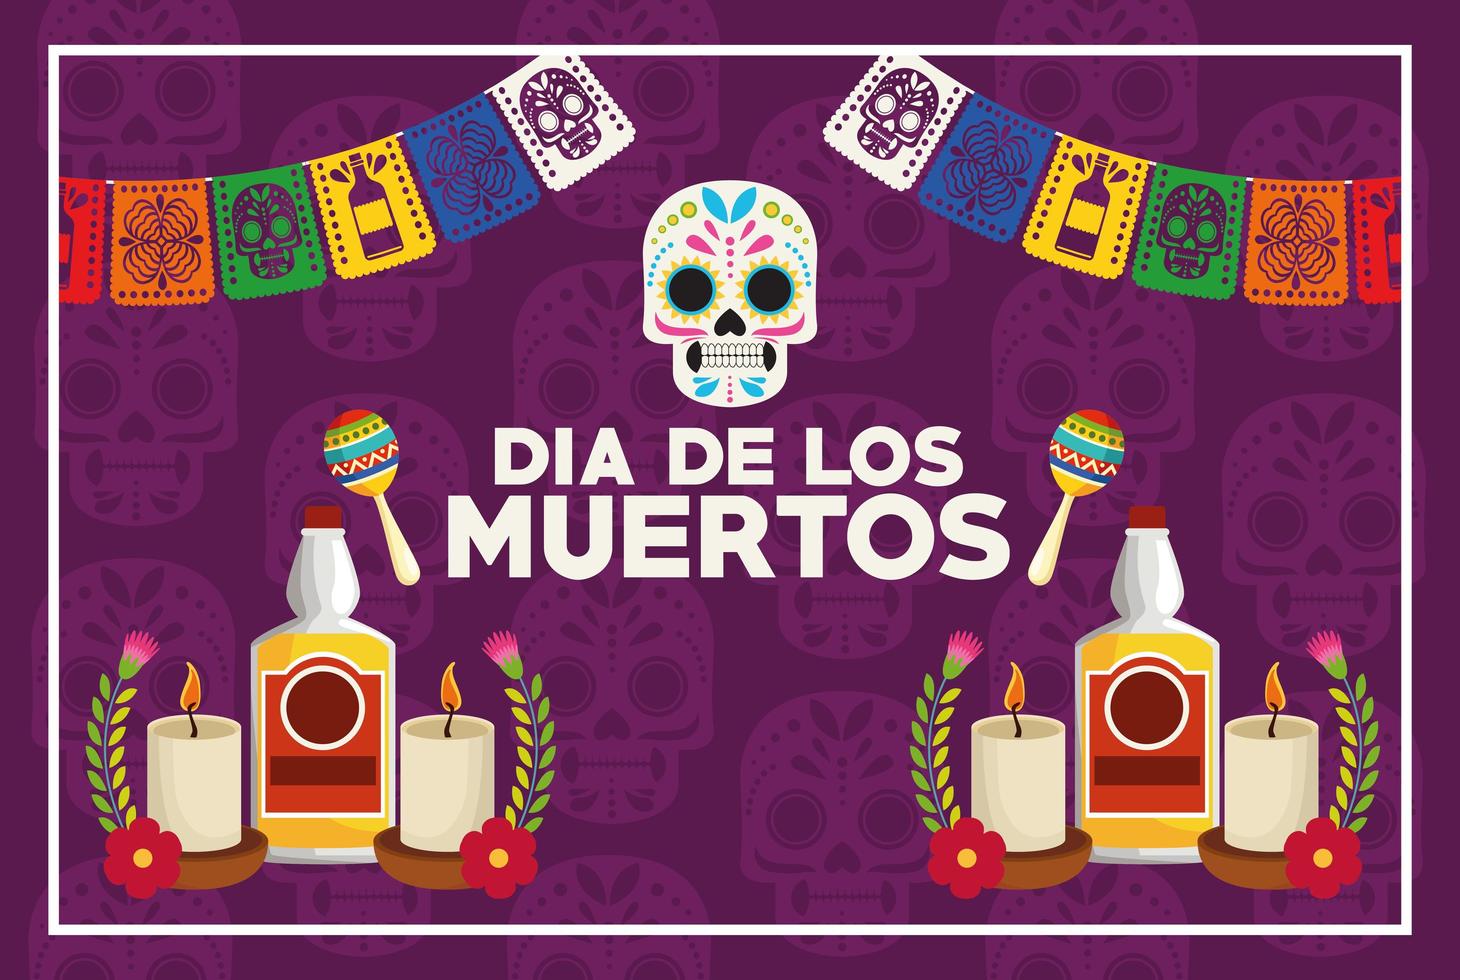 dia de los muertos celebration poster with skull and tequila bottles vector